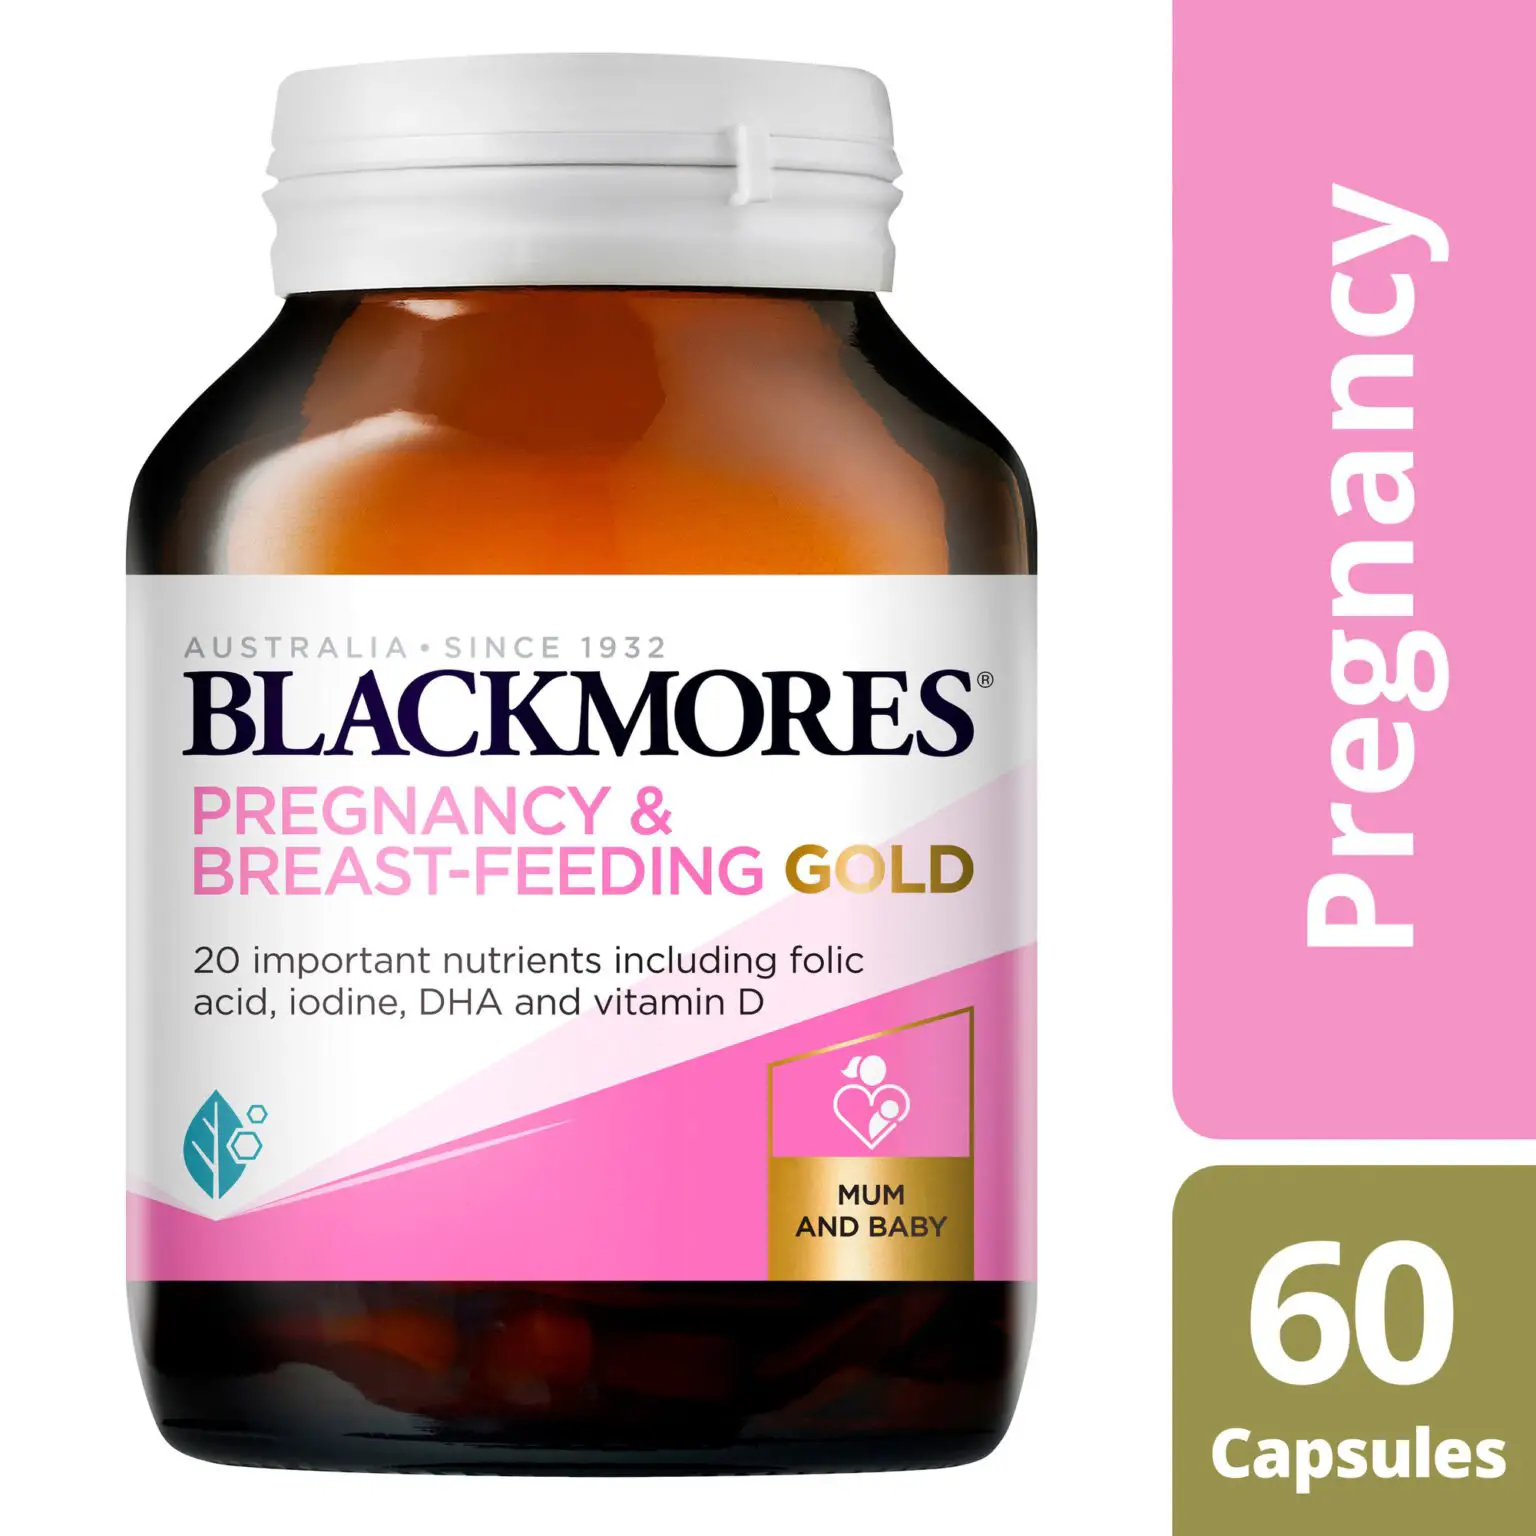 Buy Blackmores Pregnancy and Breast